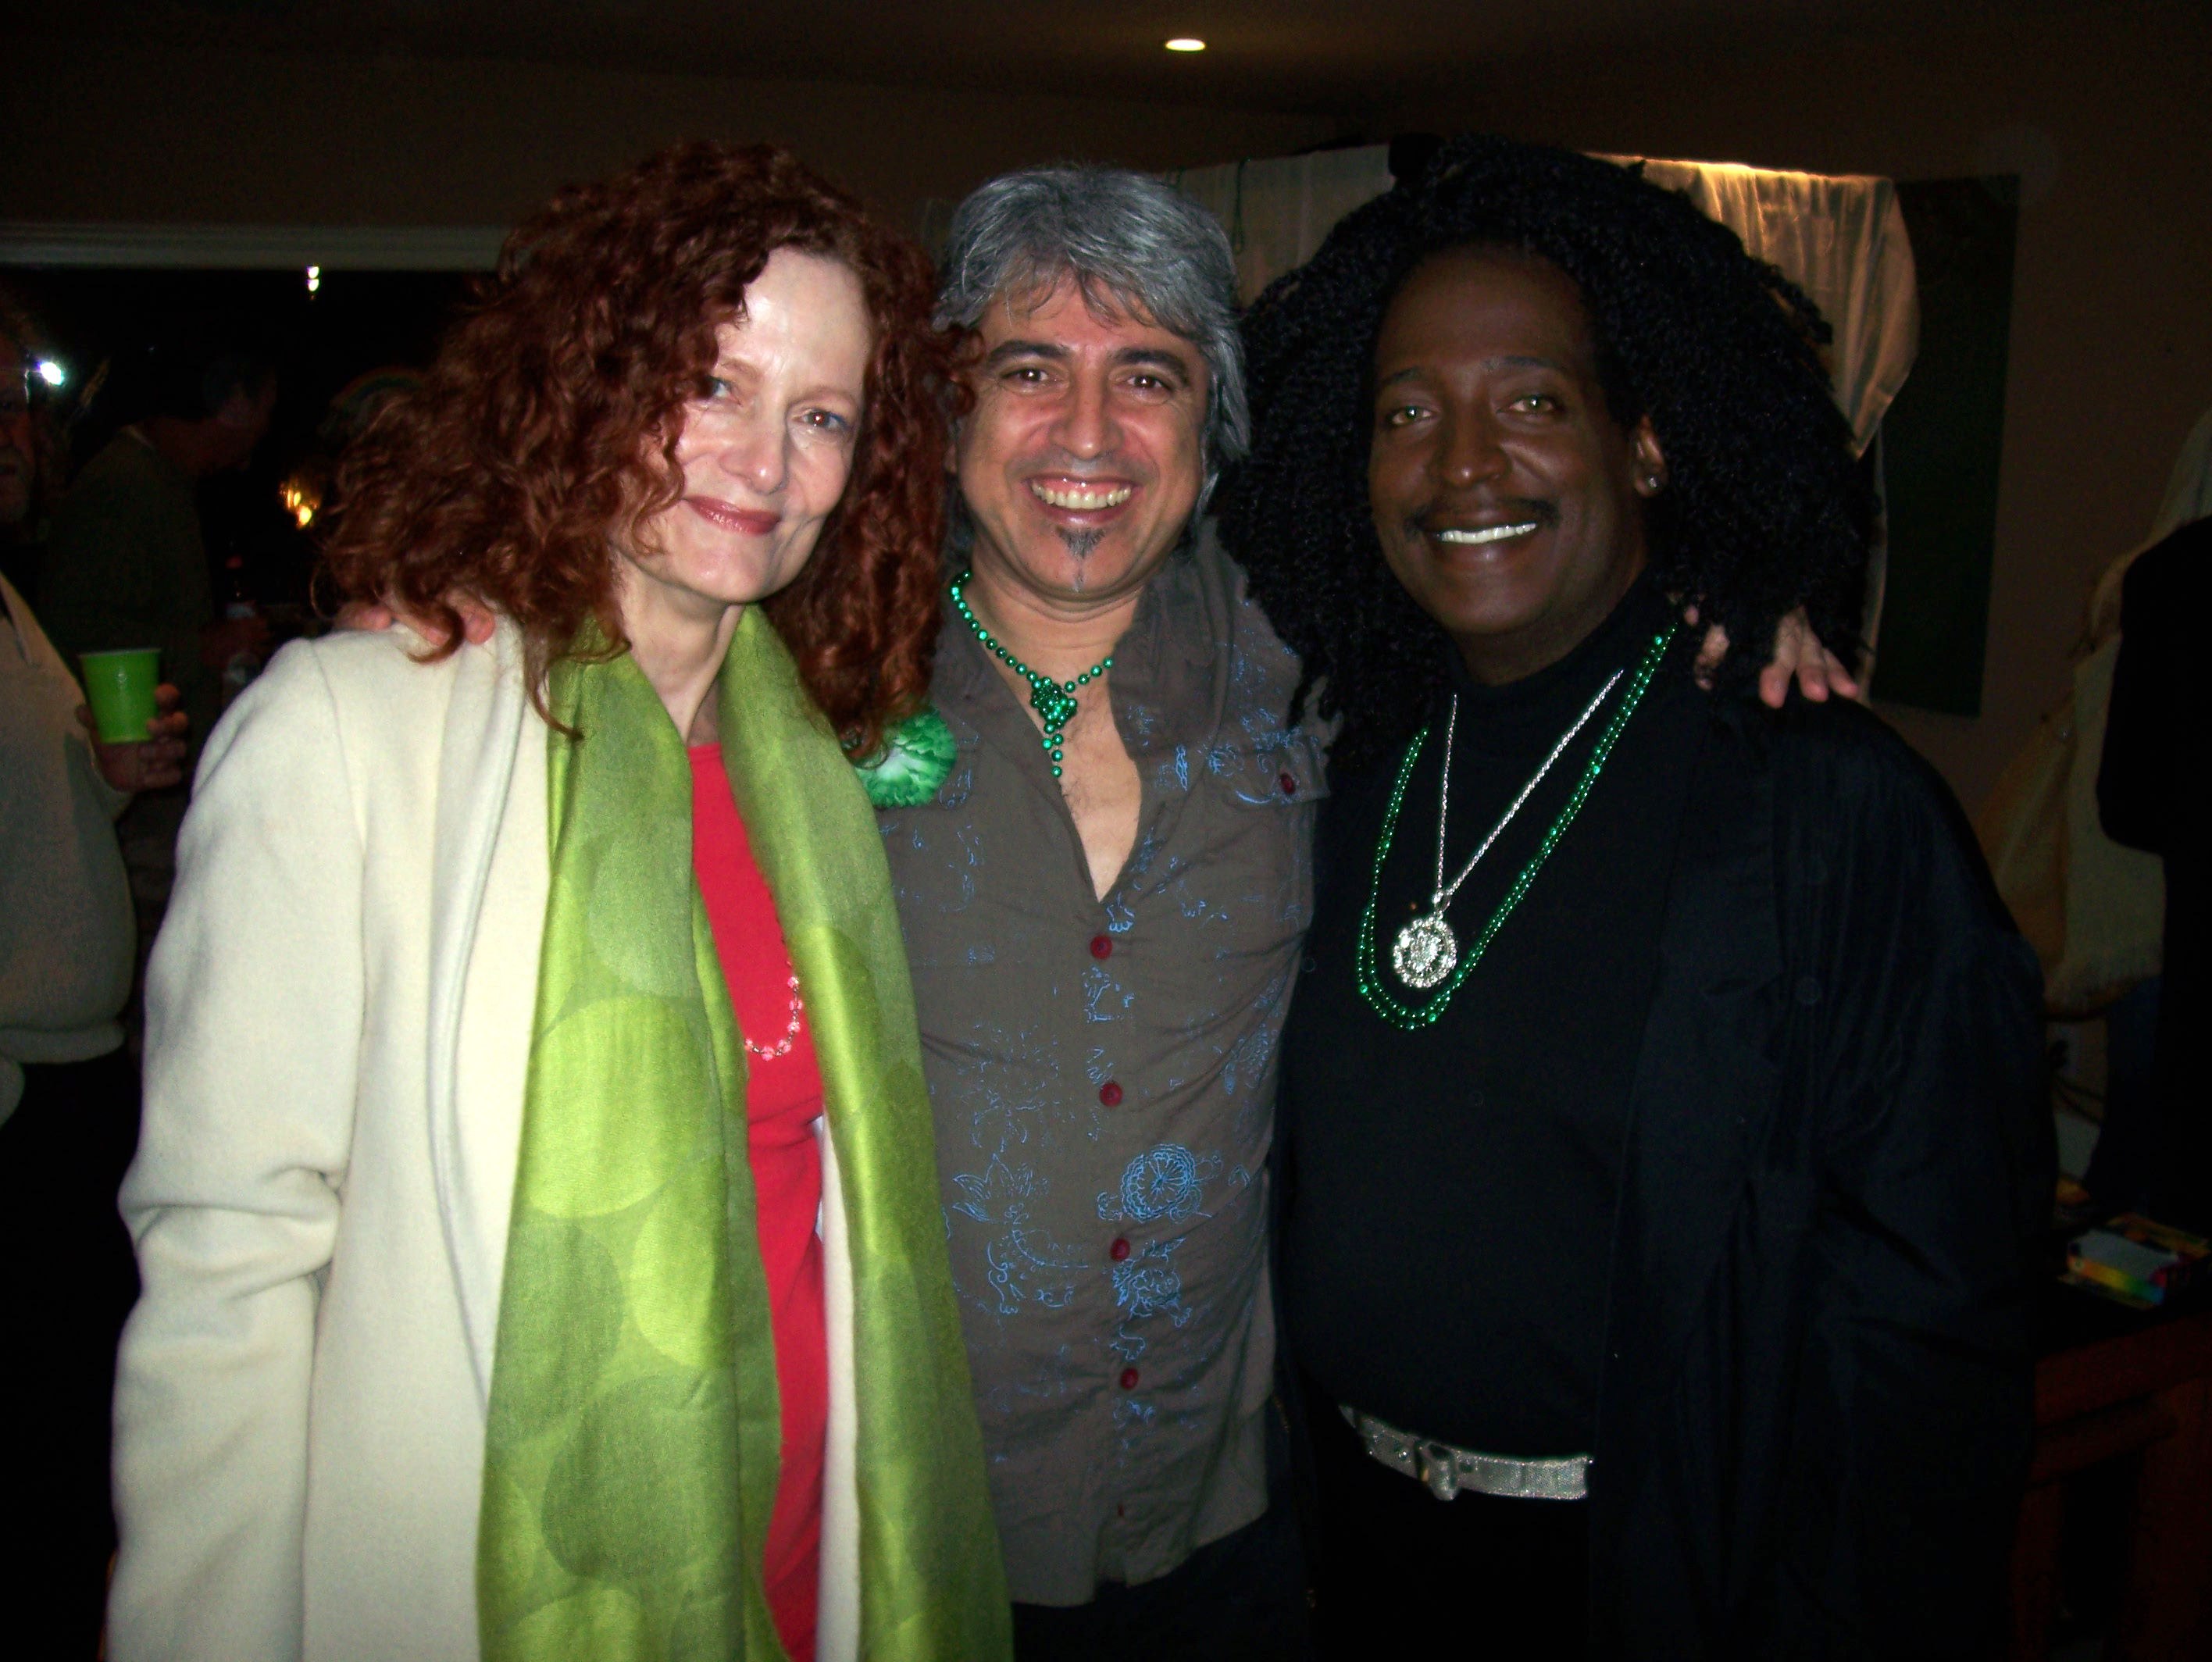 Saint Patrick's Day party at Jeff Conaway's home in 2007: Diane Salinger, Boris Acosta and James Sire